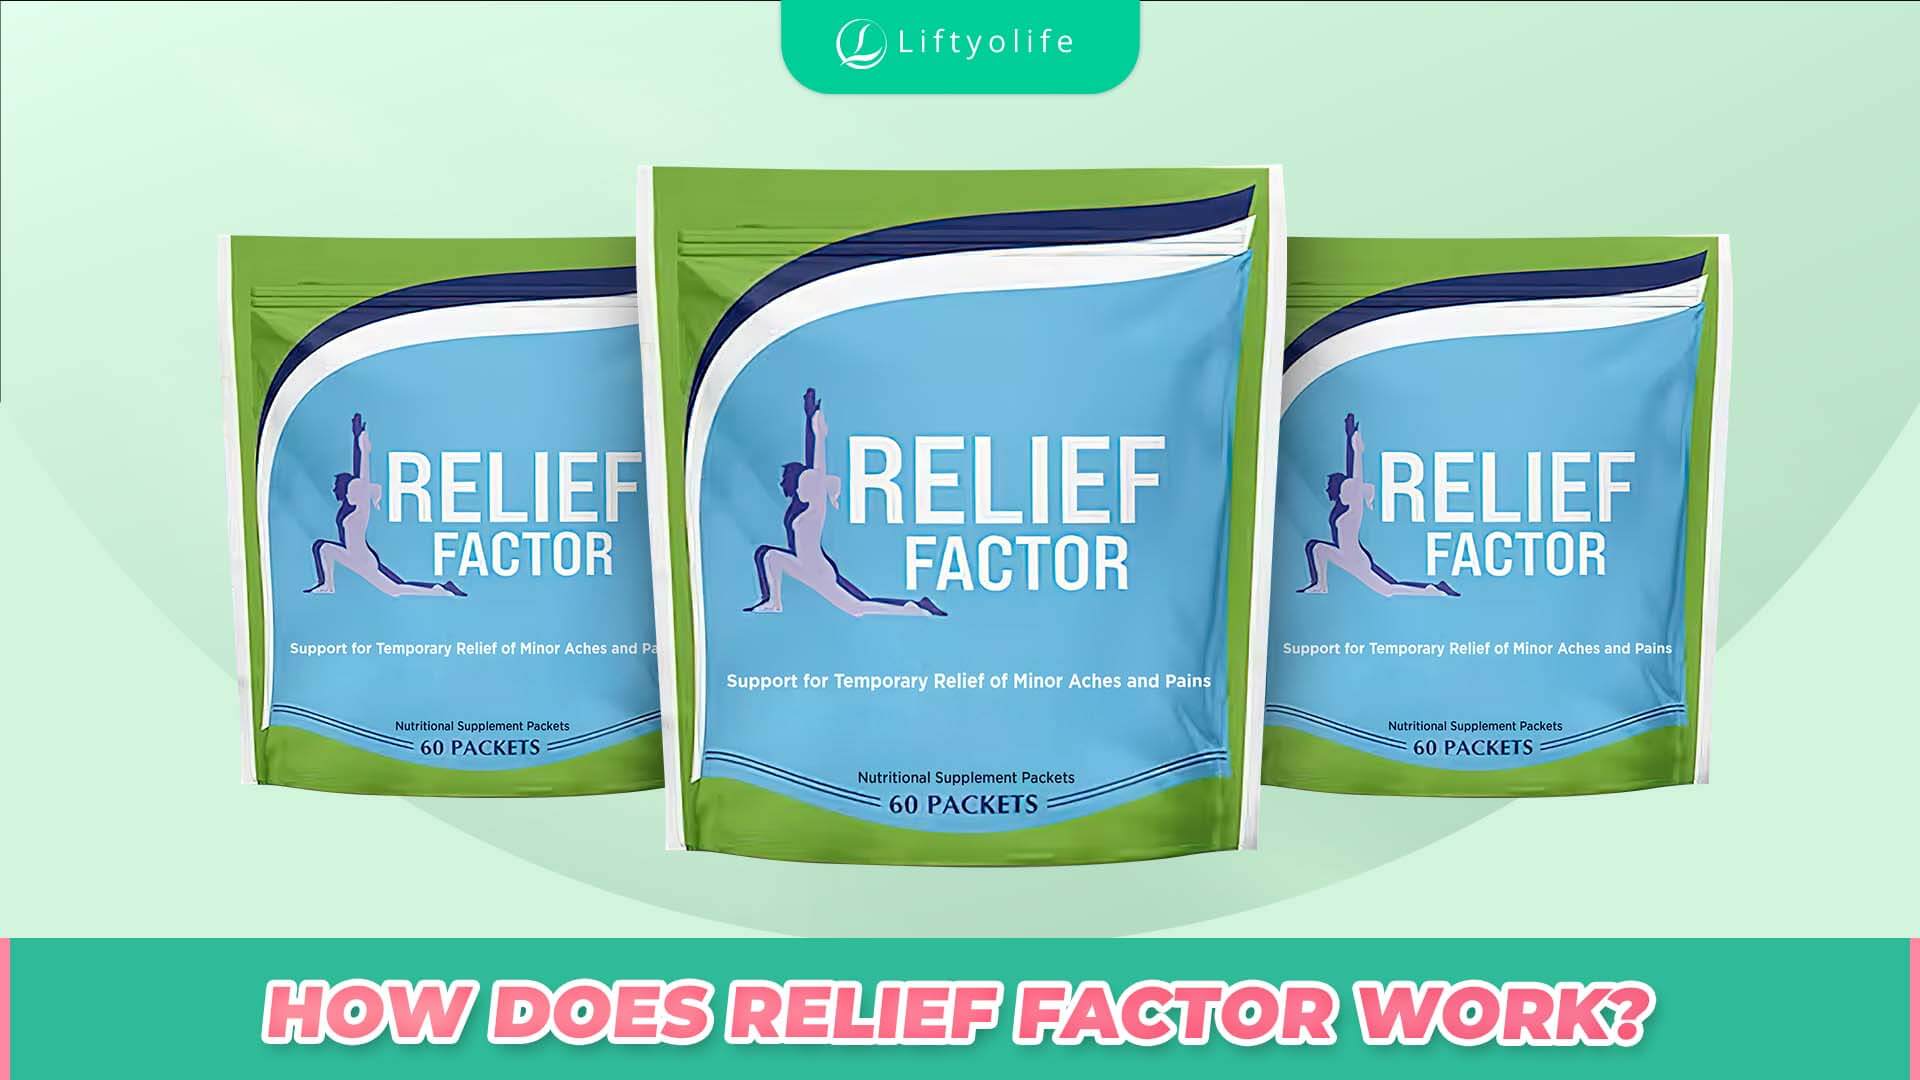 How Does Relief Factor Work